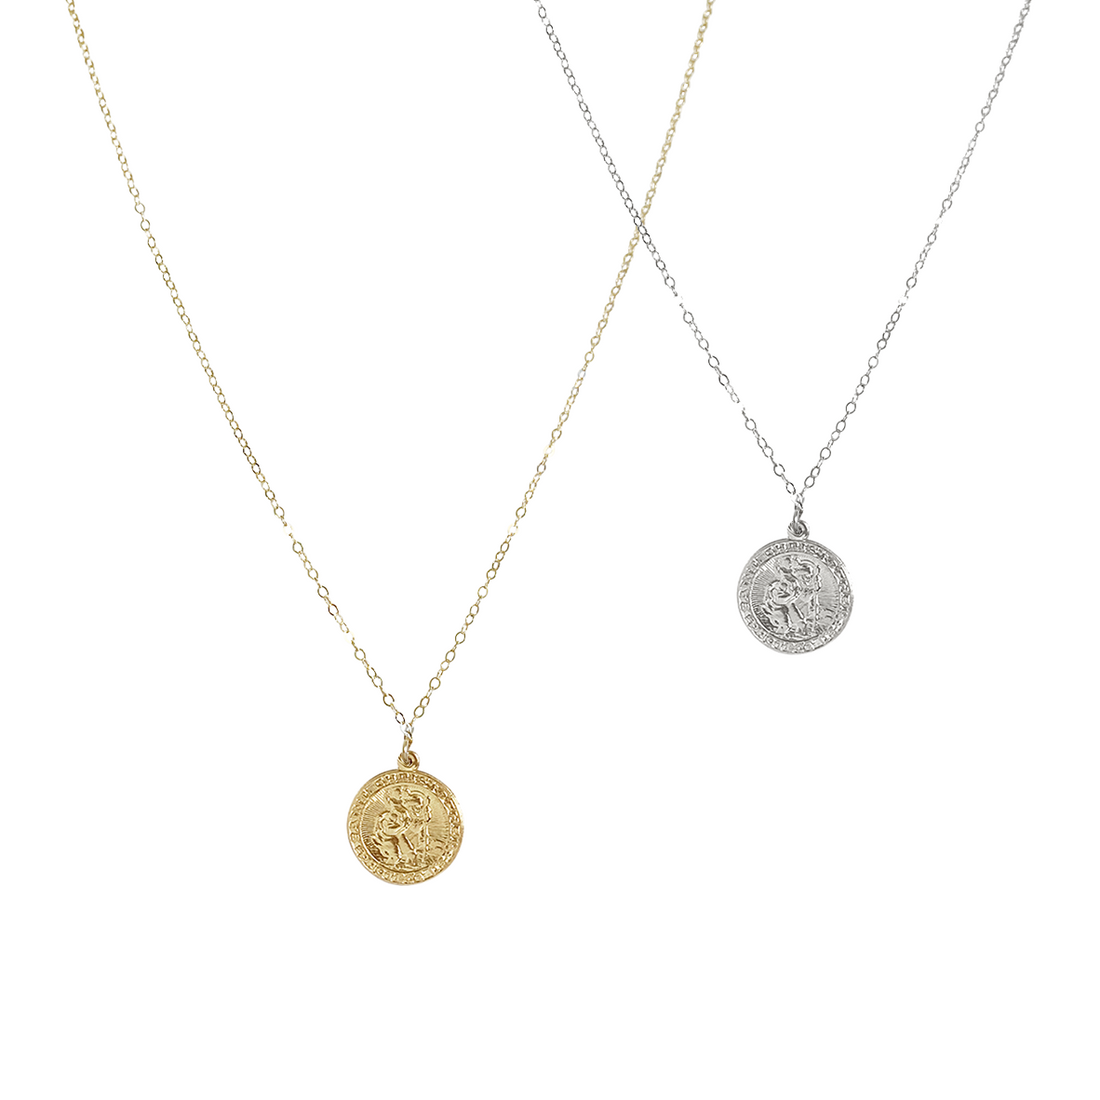 St Christopher Protection Small Necklace in Gold, Silver Color